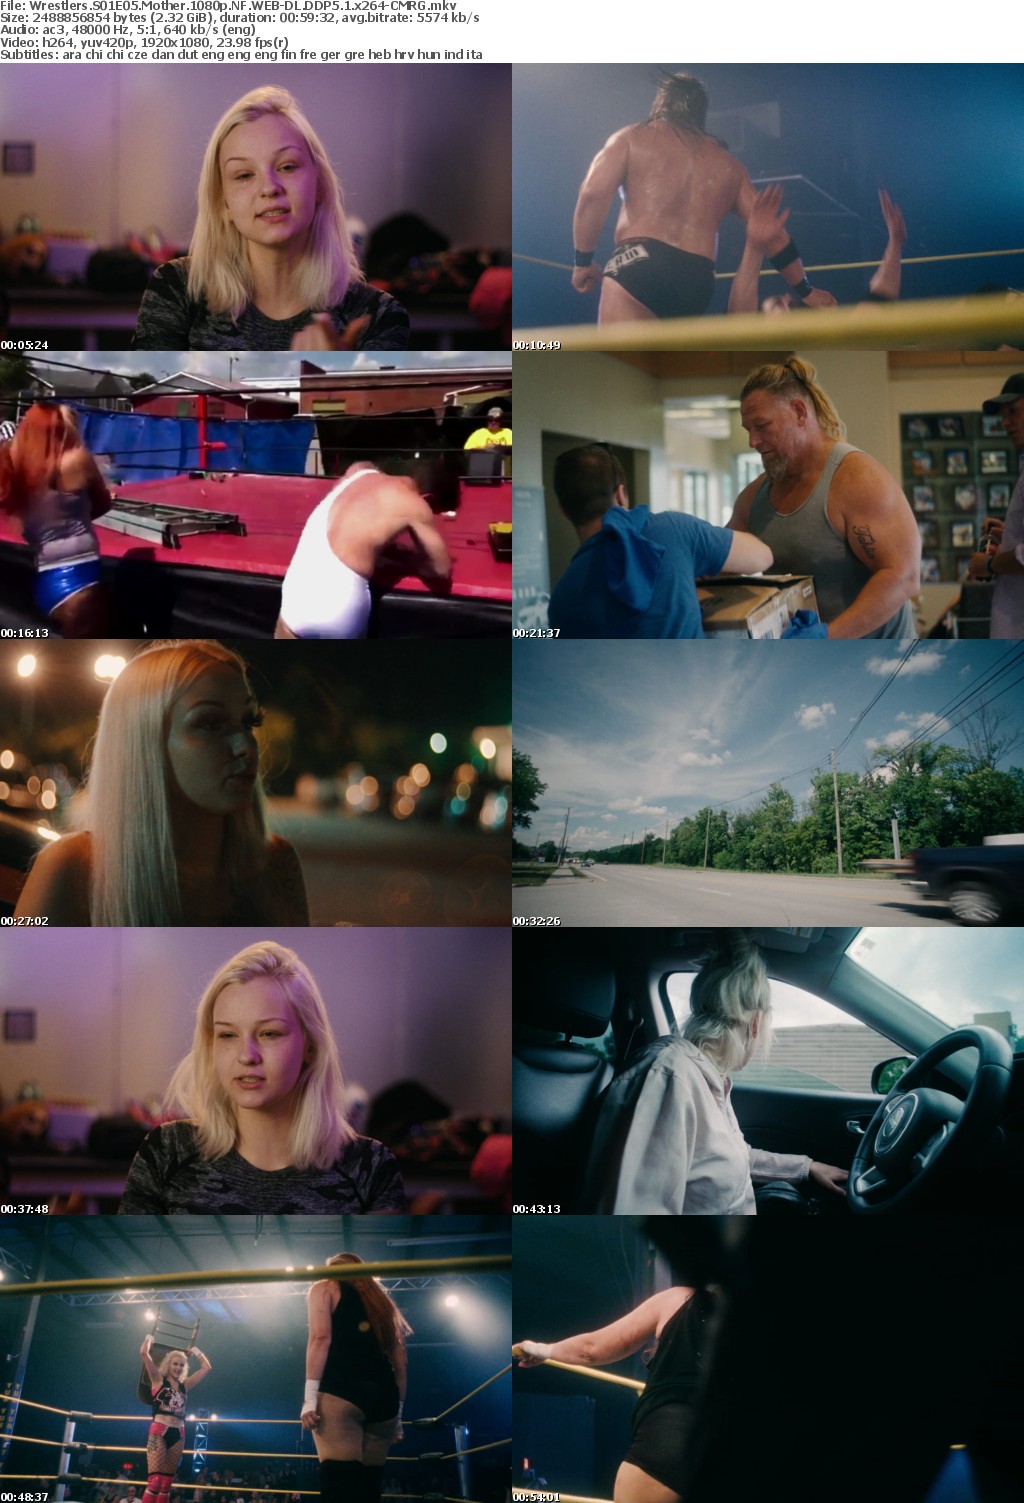 Wrestlers S01E05 Mother 1080p NF WEB-DL DDP5 1 x264-CMRG